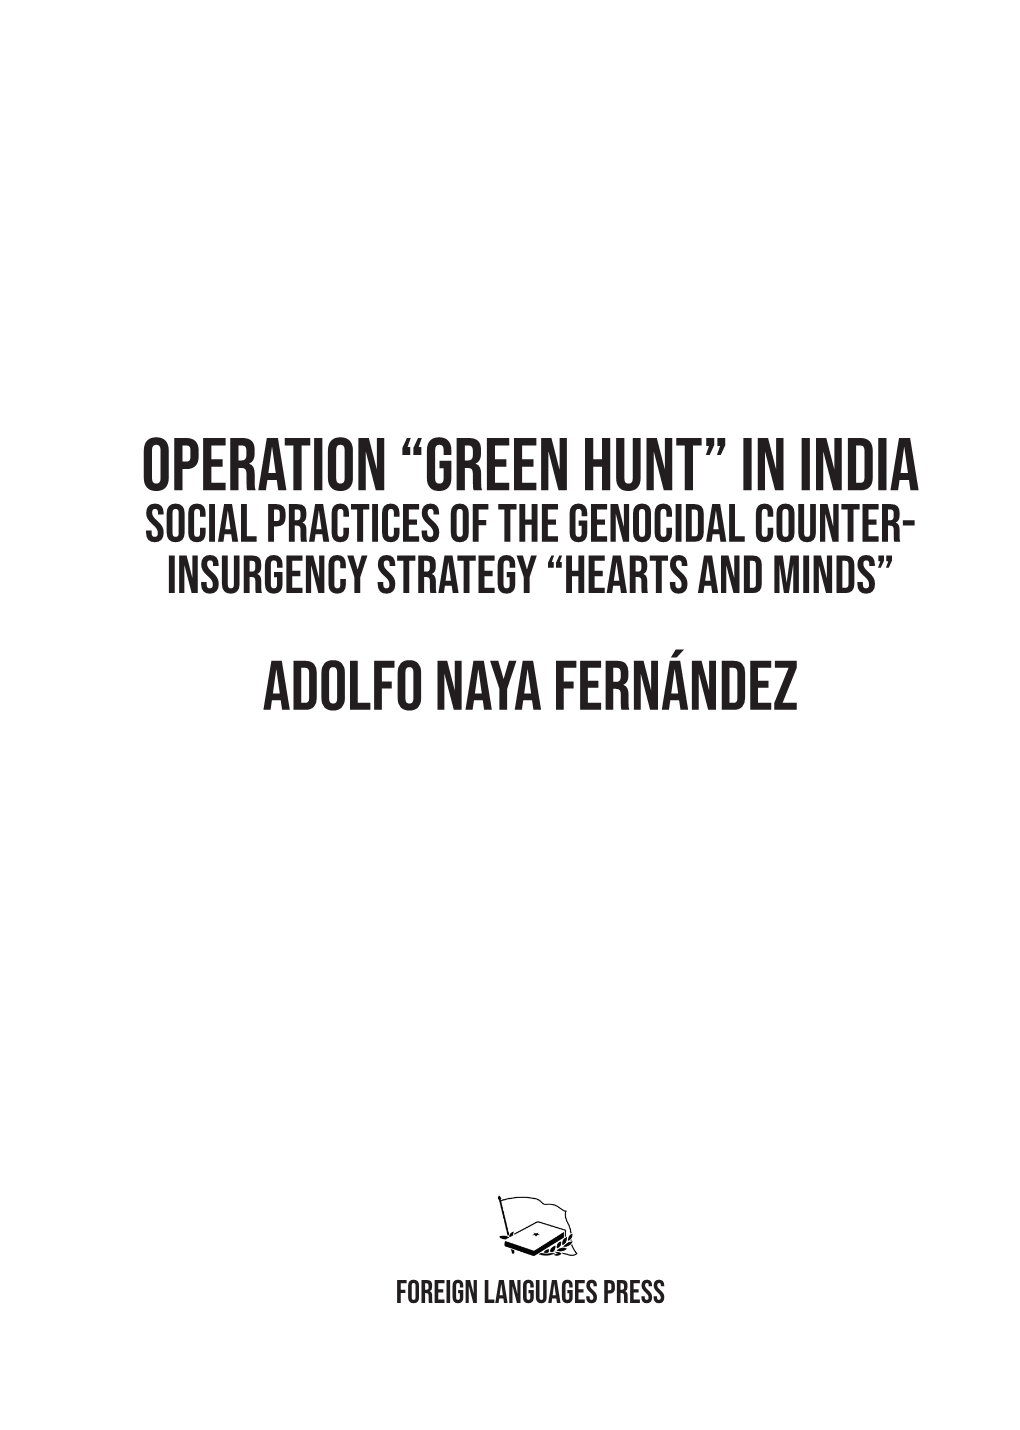 Operation “Green Hunt” in India Social Practices of the Genocidal Counter- Insurgency Strategy “Hearts and Minds” Adolfo Naya Fernández